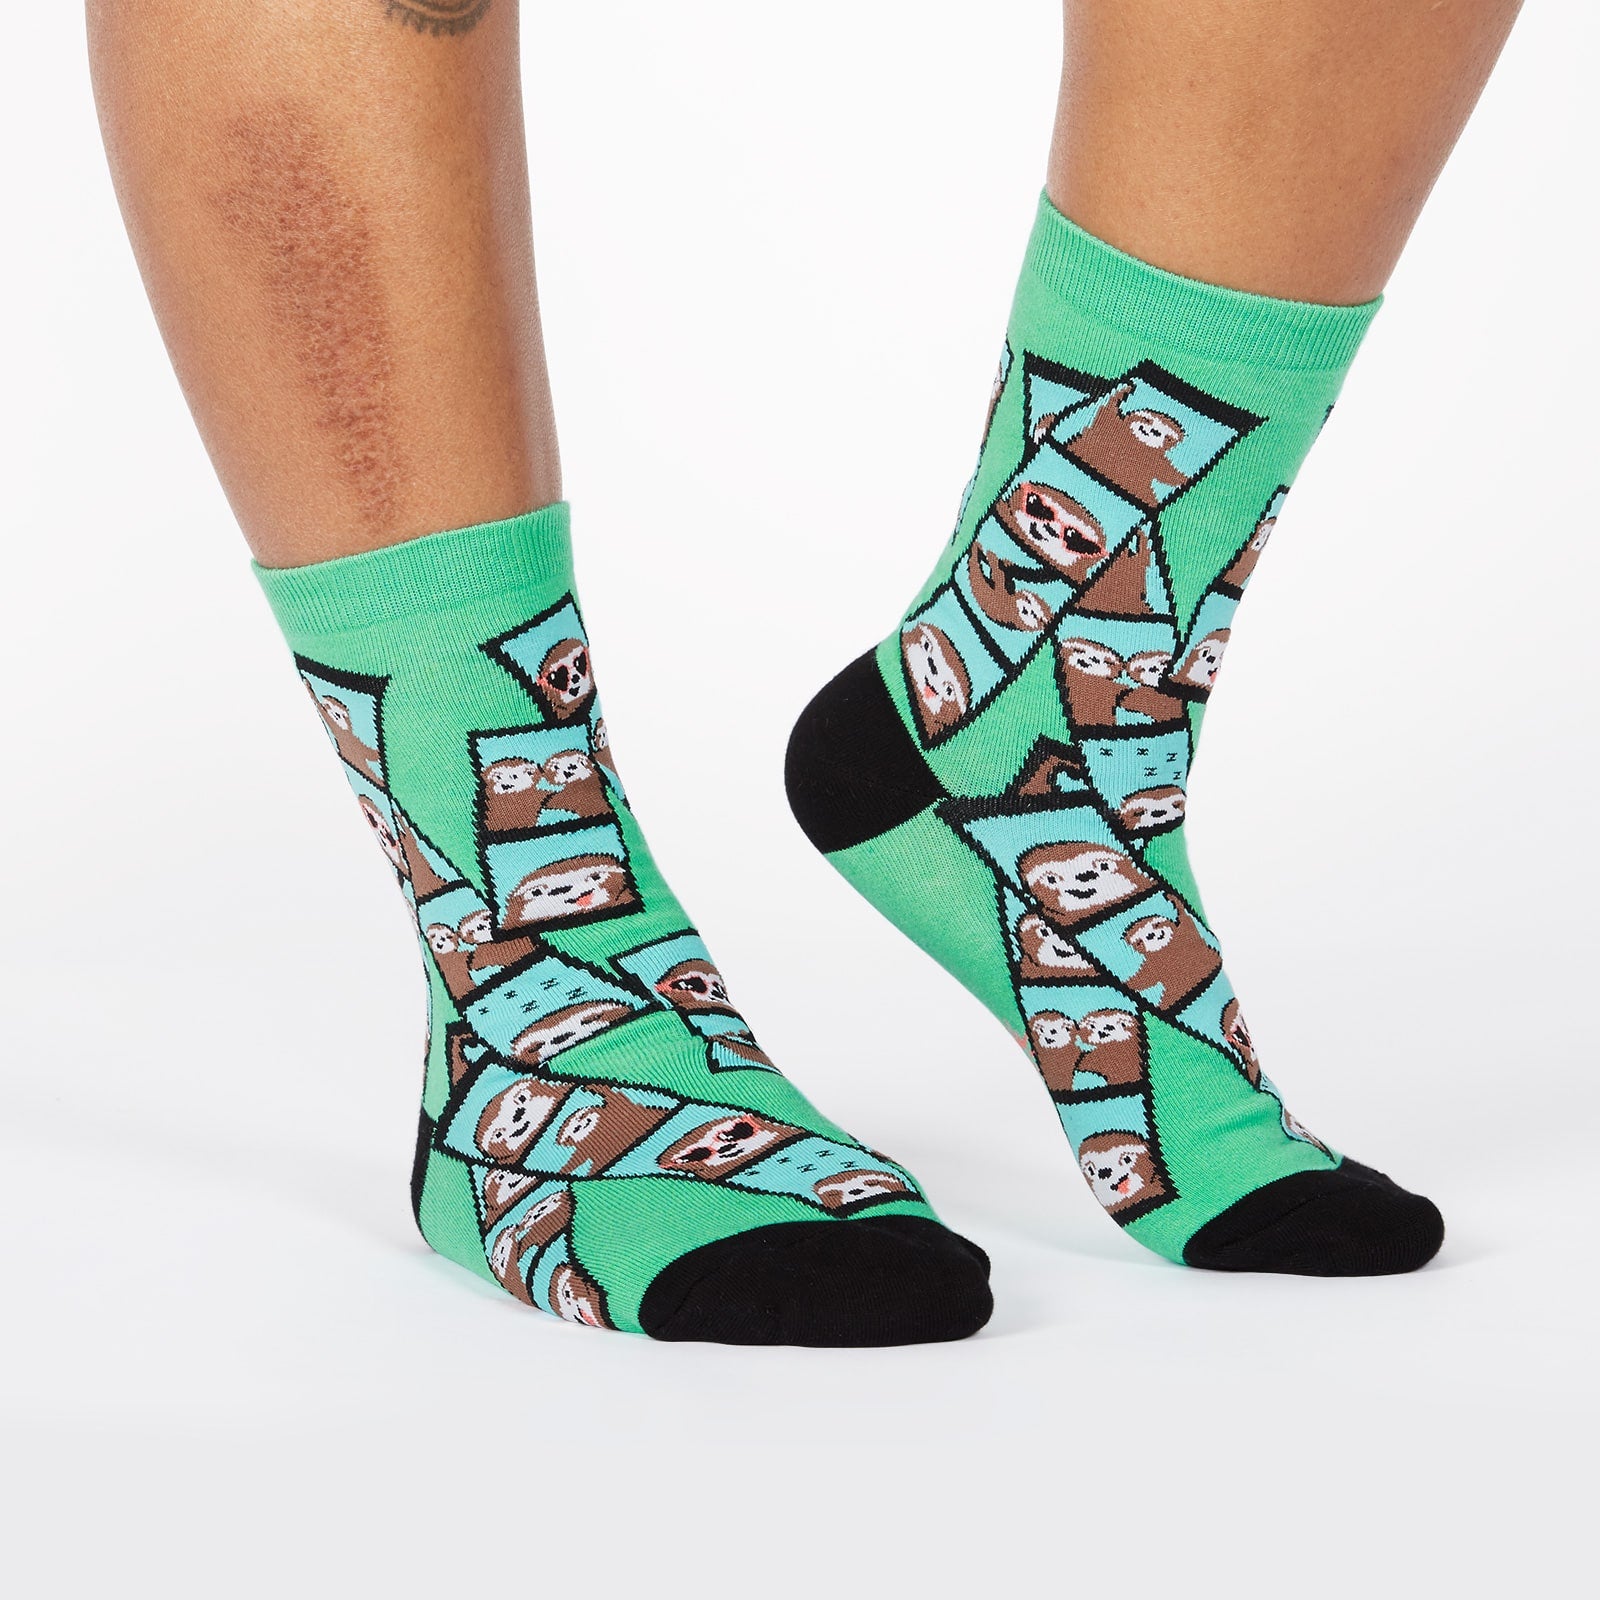 Sock It To Me Oh Snap! women's crew sock. Featuring green sock with photo booth images of sloths all over. Socks worn by model seen from front. 